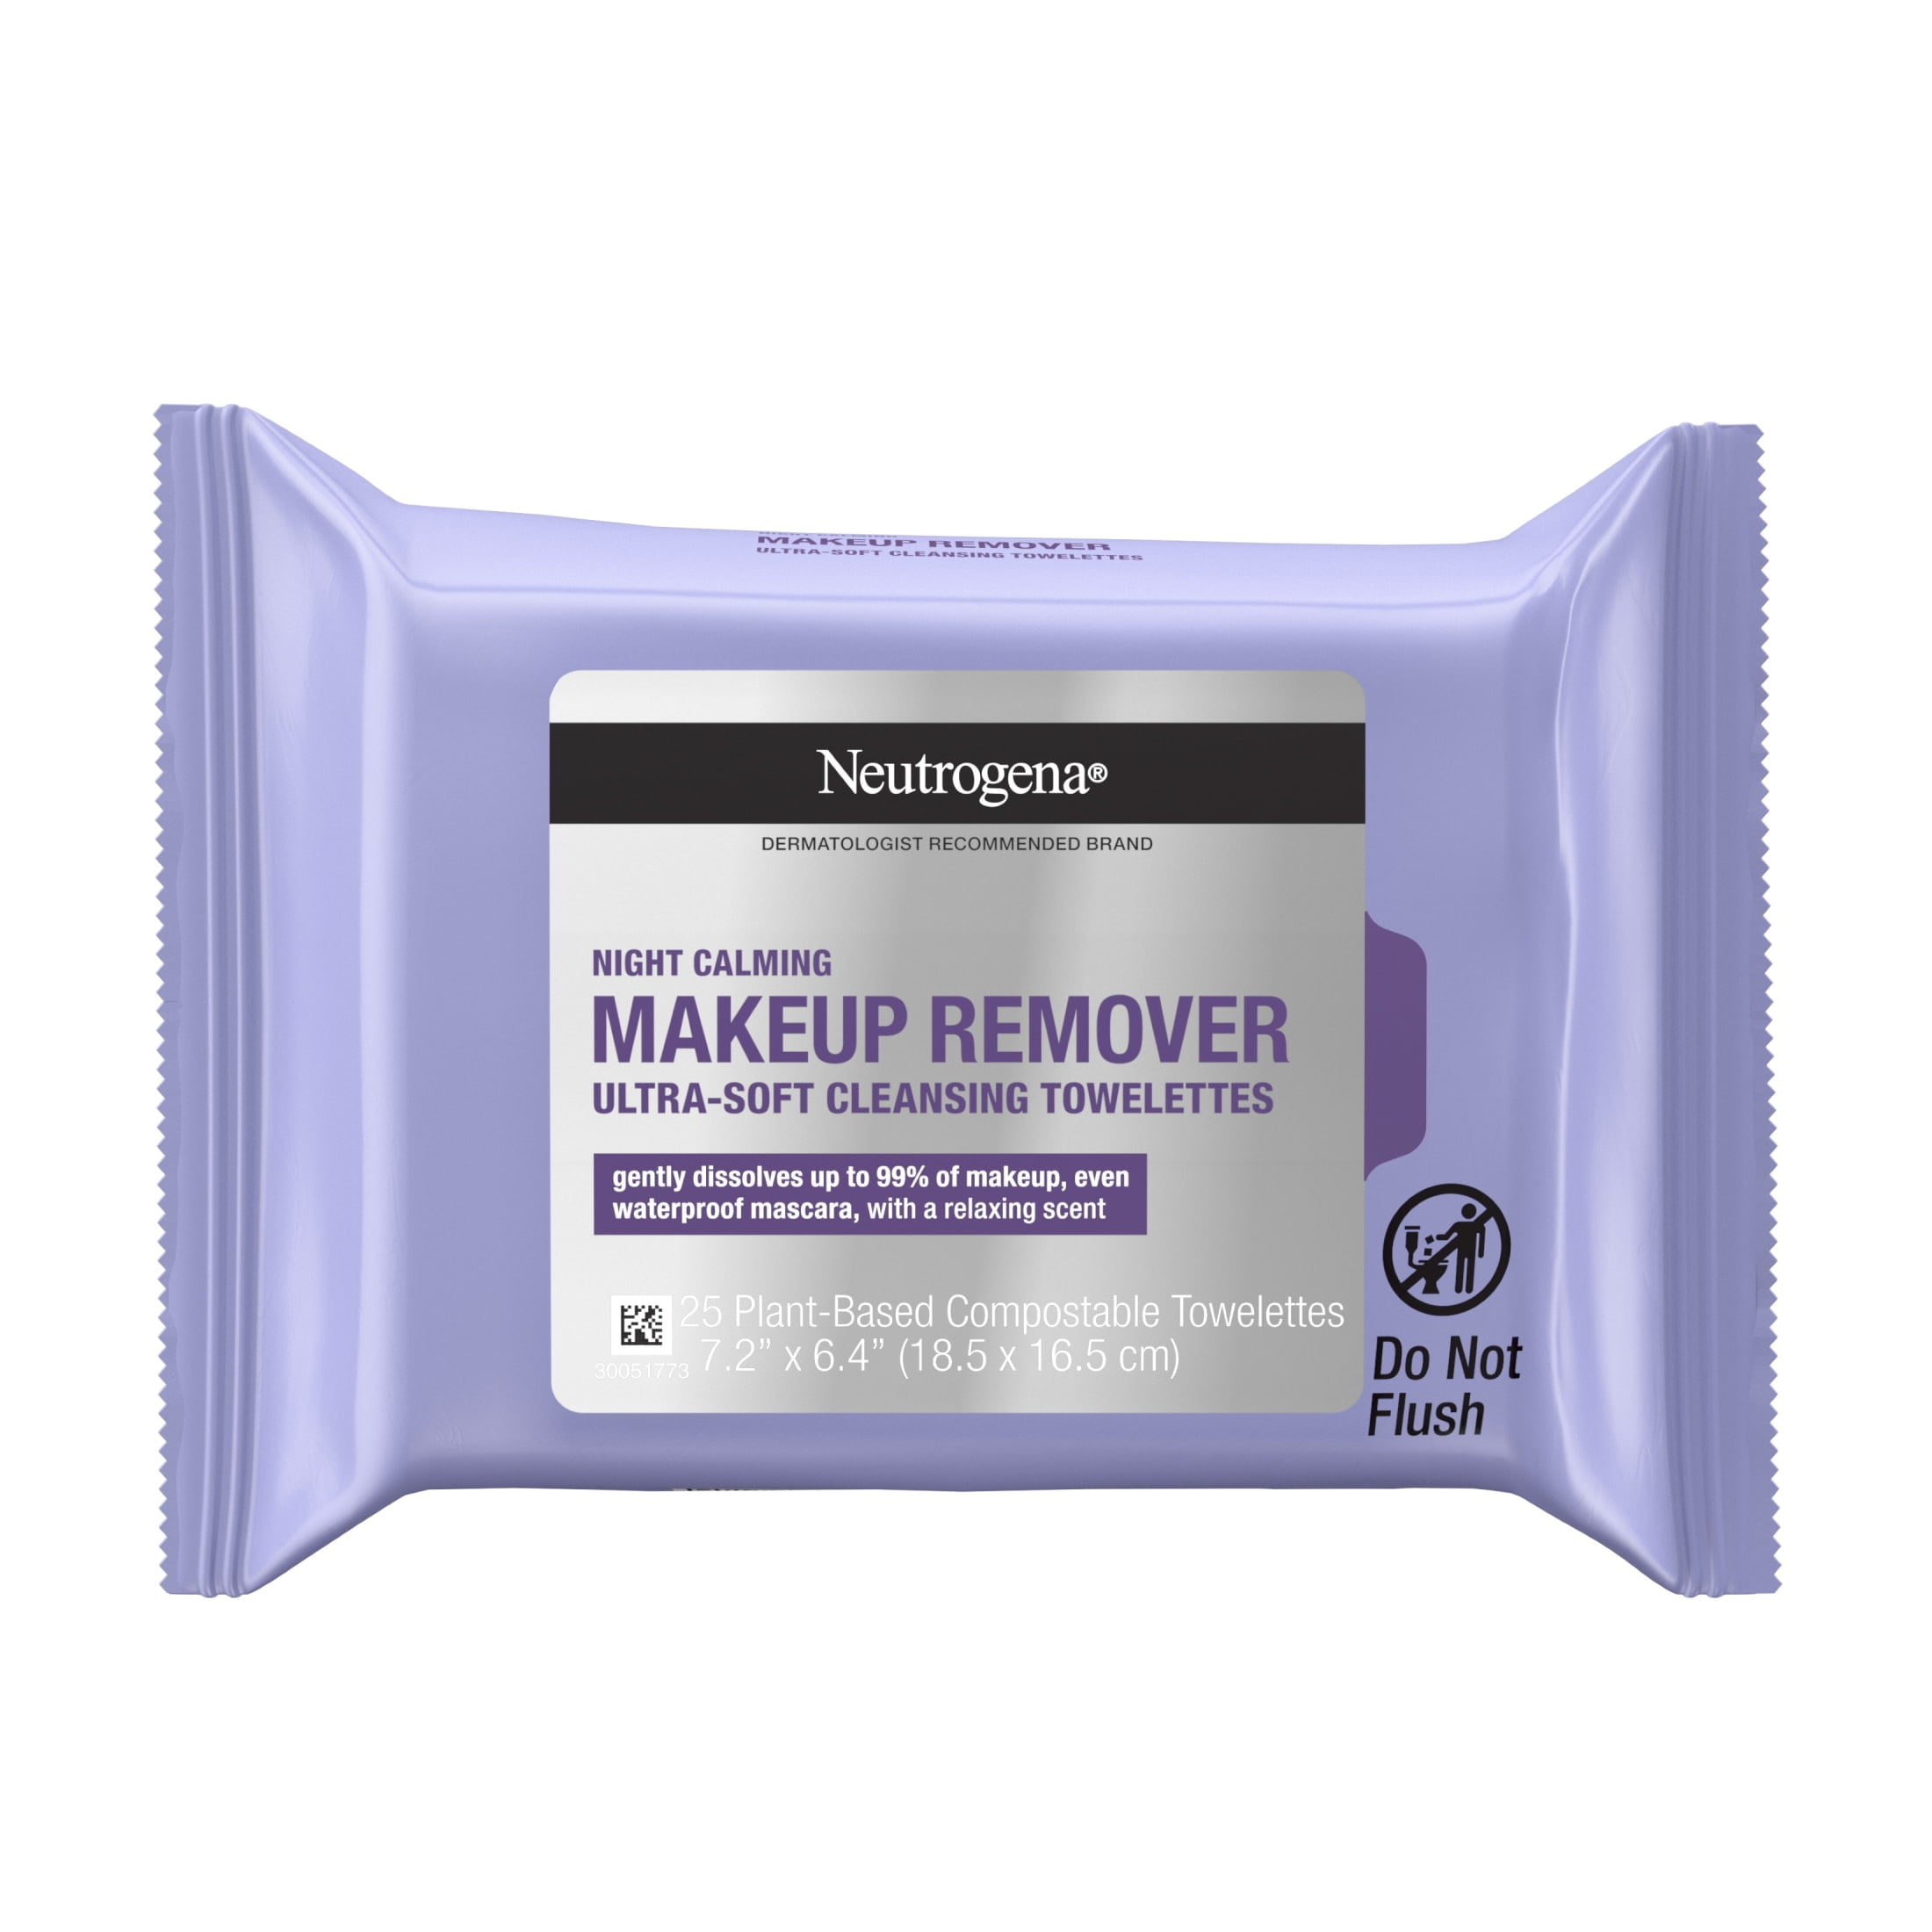 Neutrogena Makeup Remover Wipes and Face Cleansing 25 ct - Walmart.com